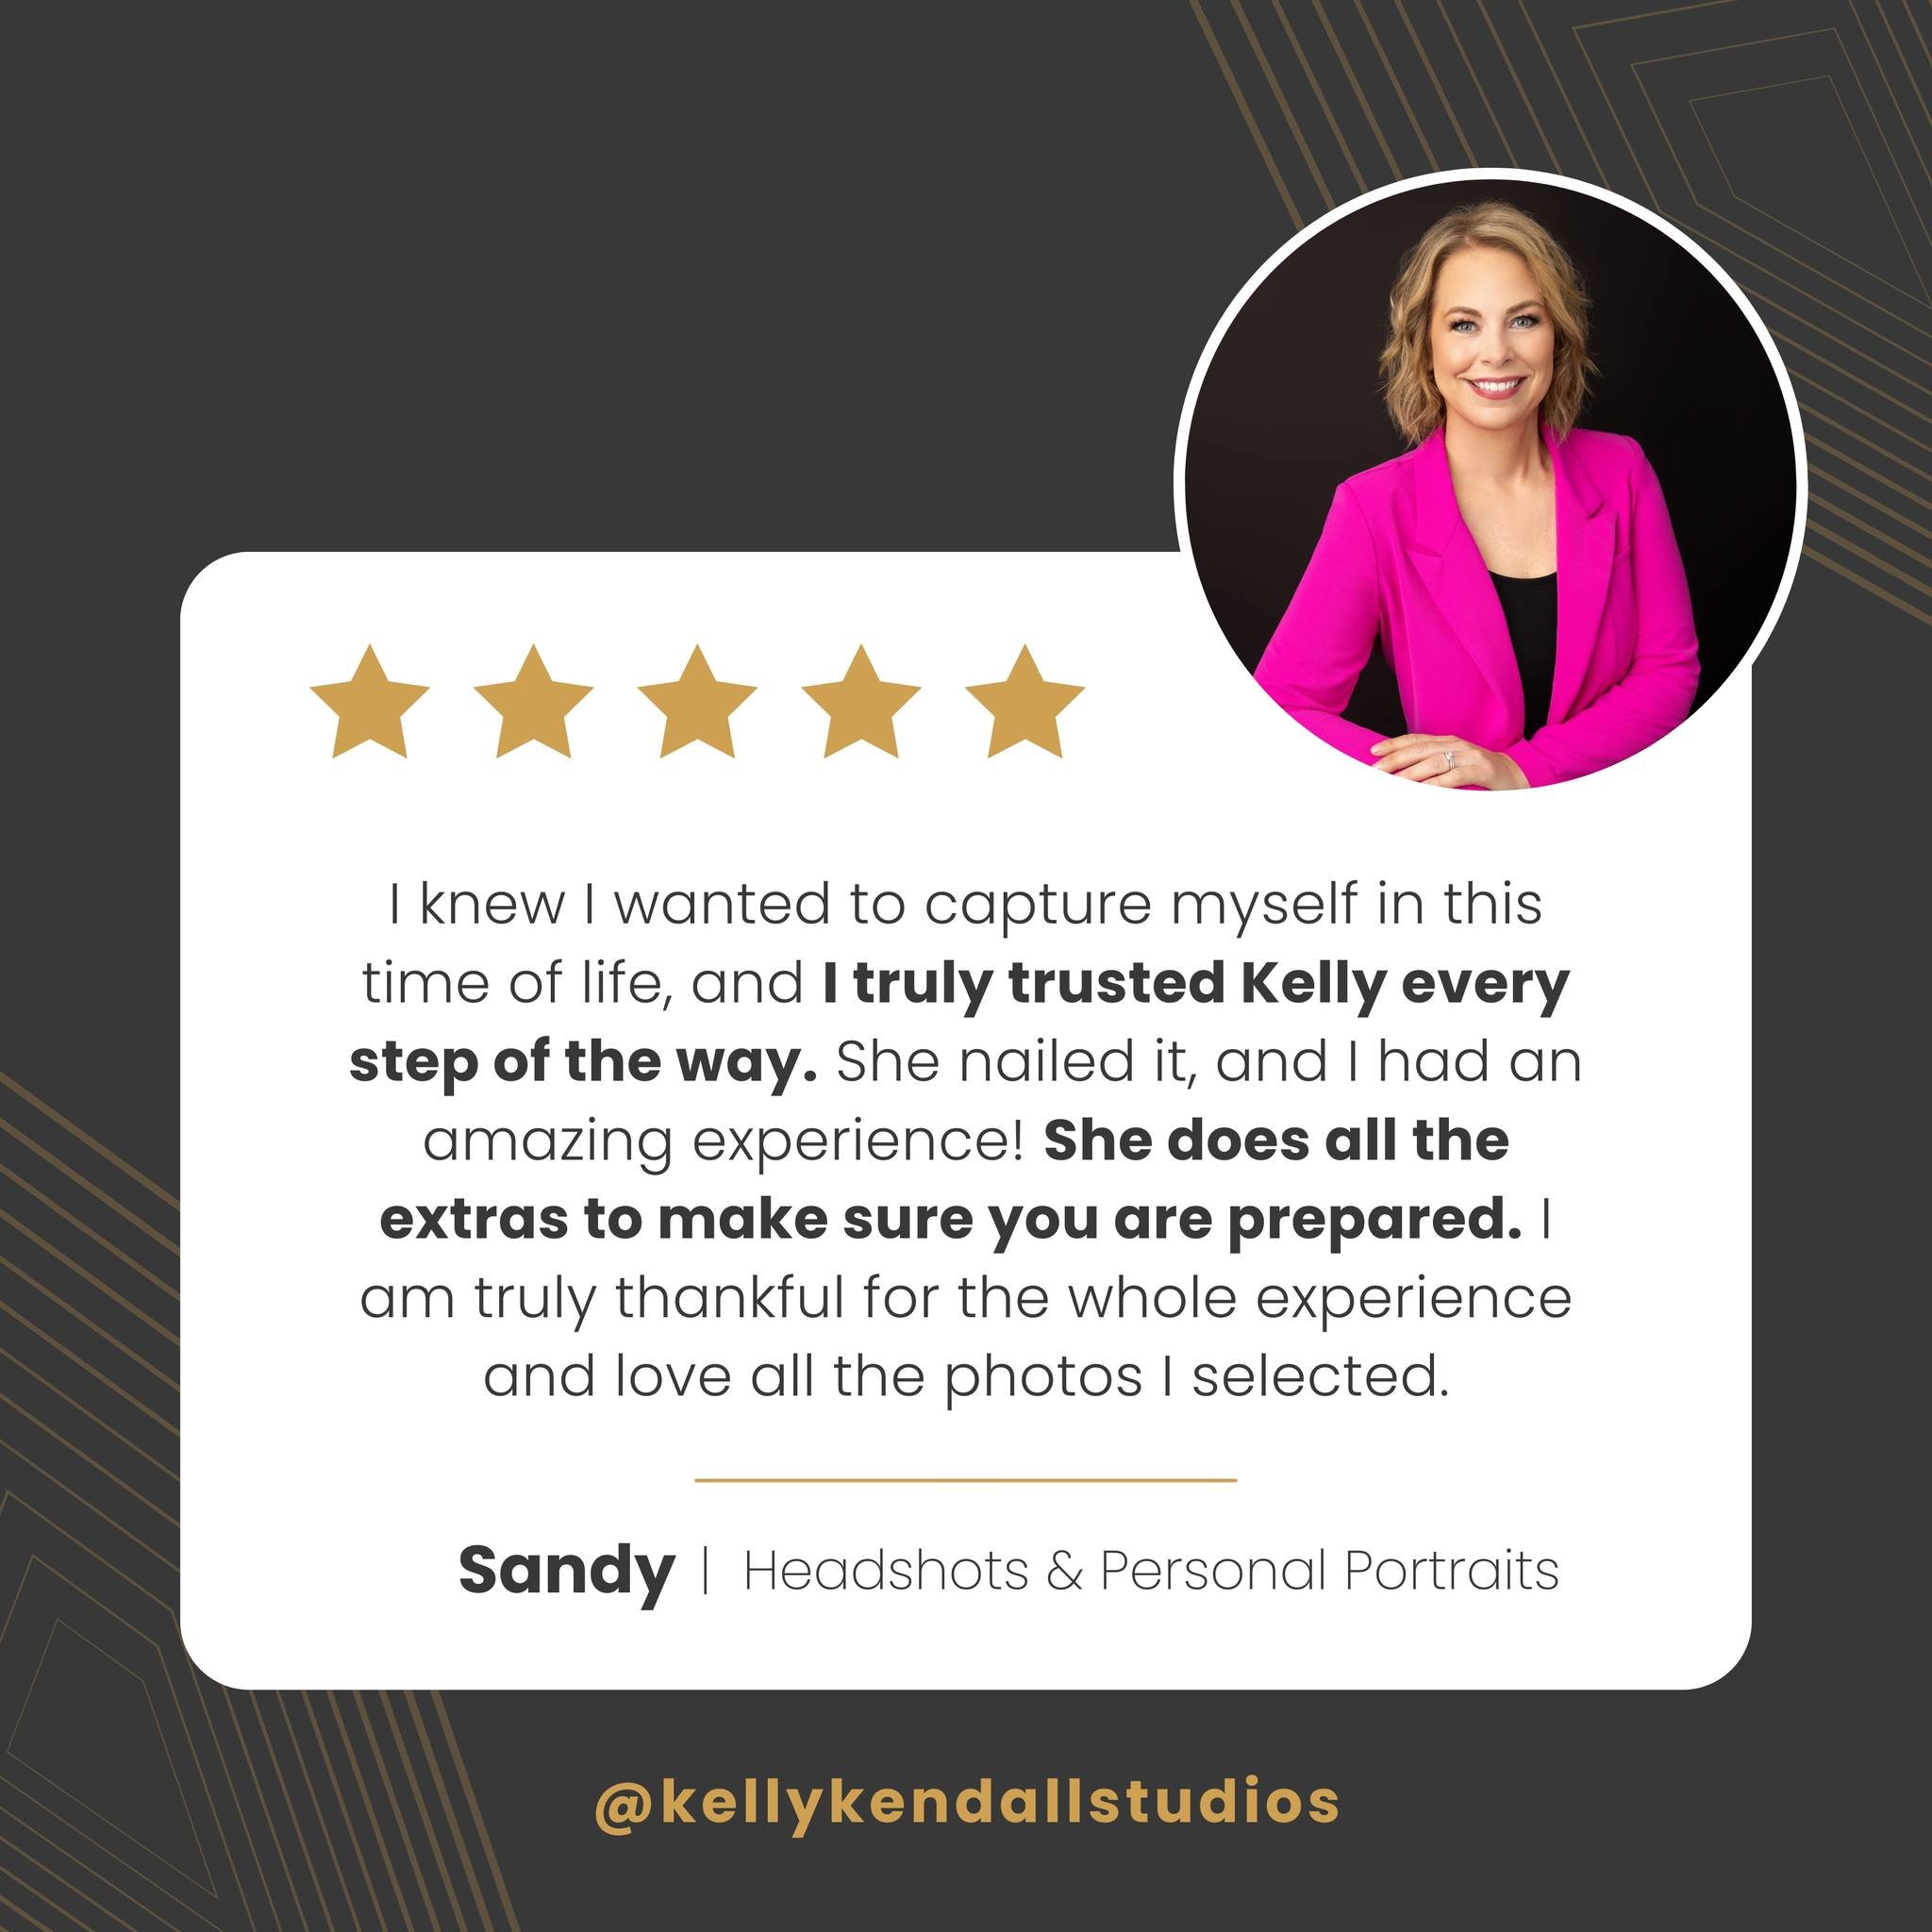 &quot;I knew I wanted to capture myself in this time of my life, and I truly trusted Kelly every step of the way.  She nailed it, and I had an amazing experience! 

She does all the the extras to make sure you are prepared. I had both in studio and o